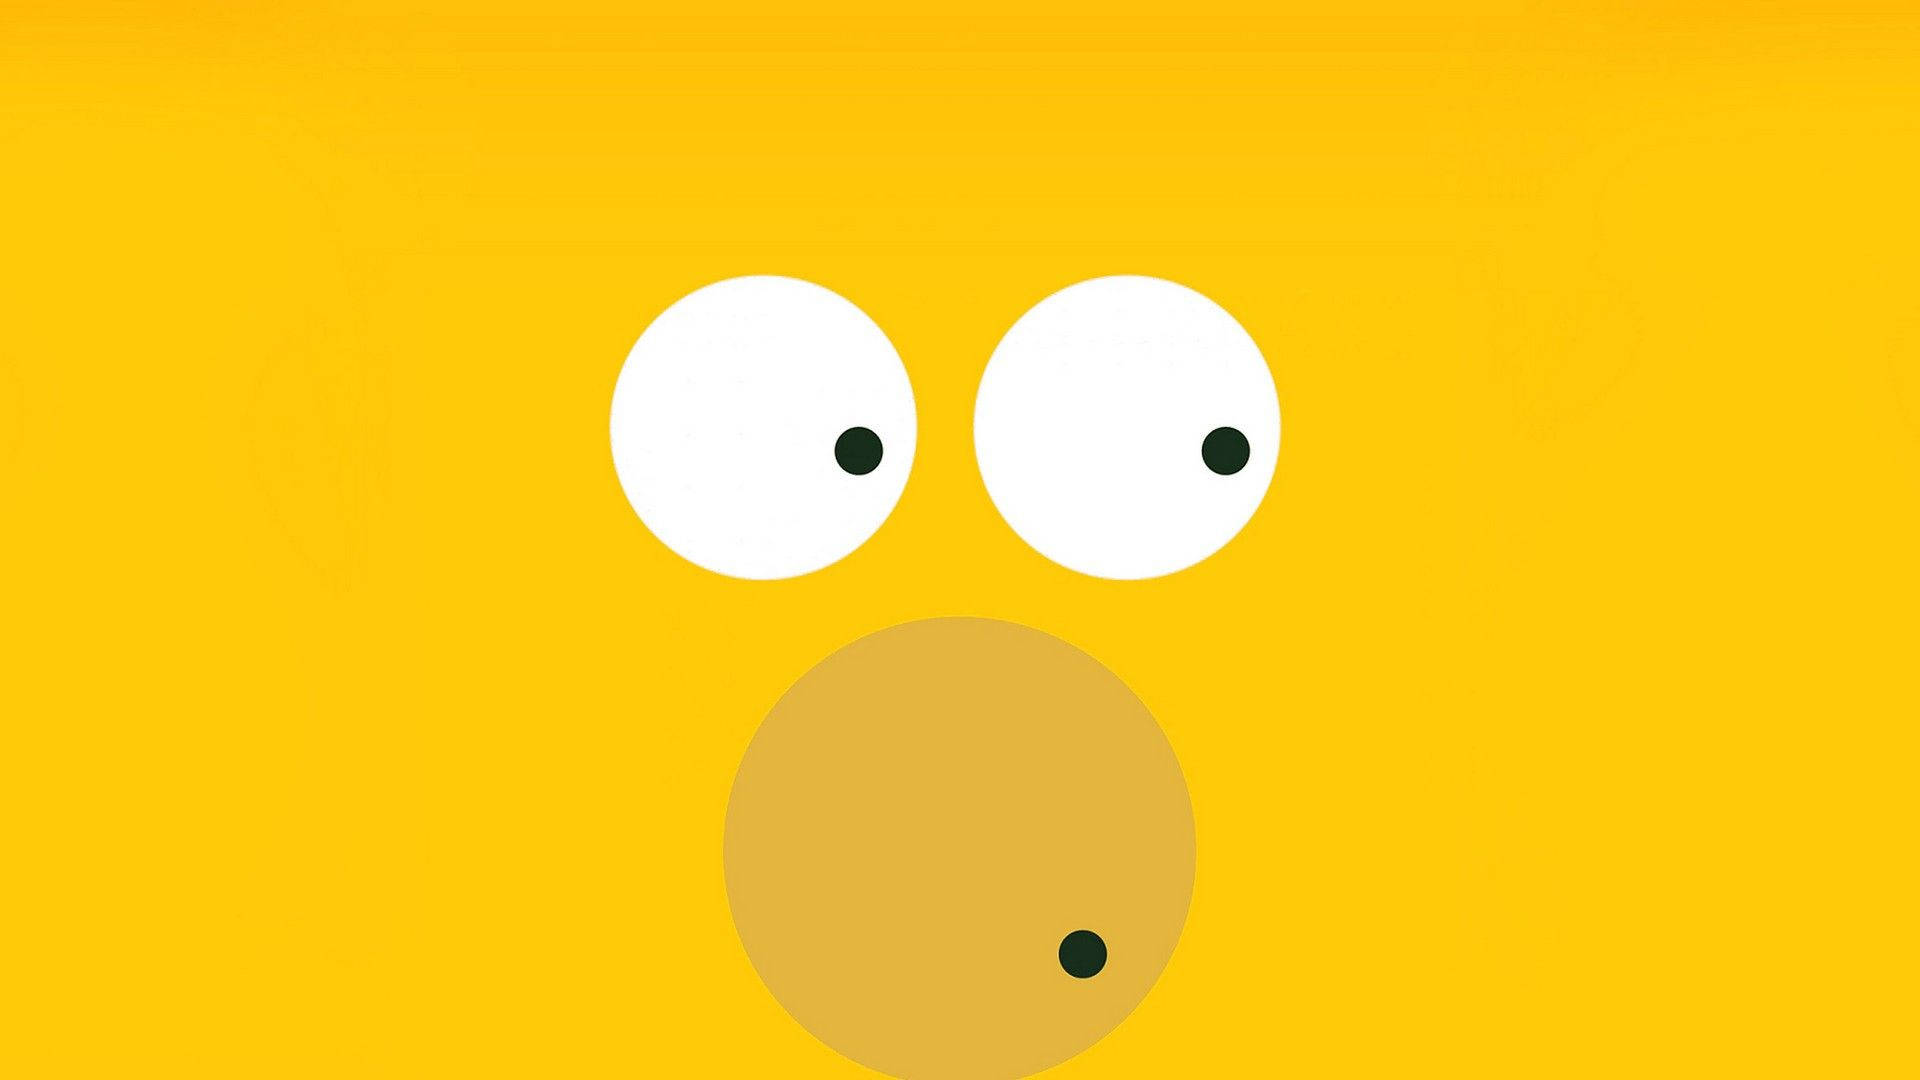 Simpsons Face Cute Yellow Graphic Wallpaper